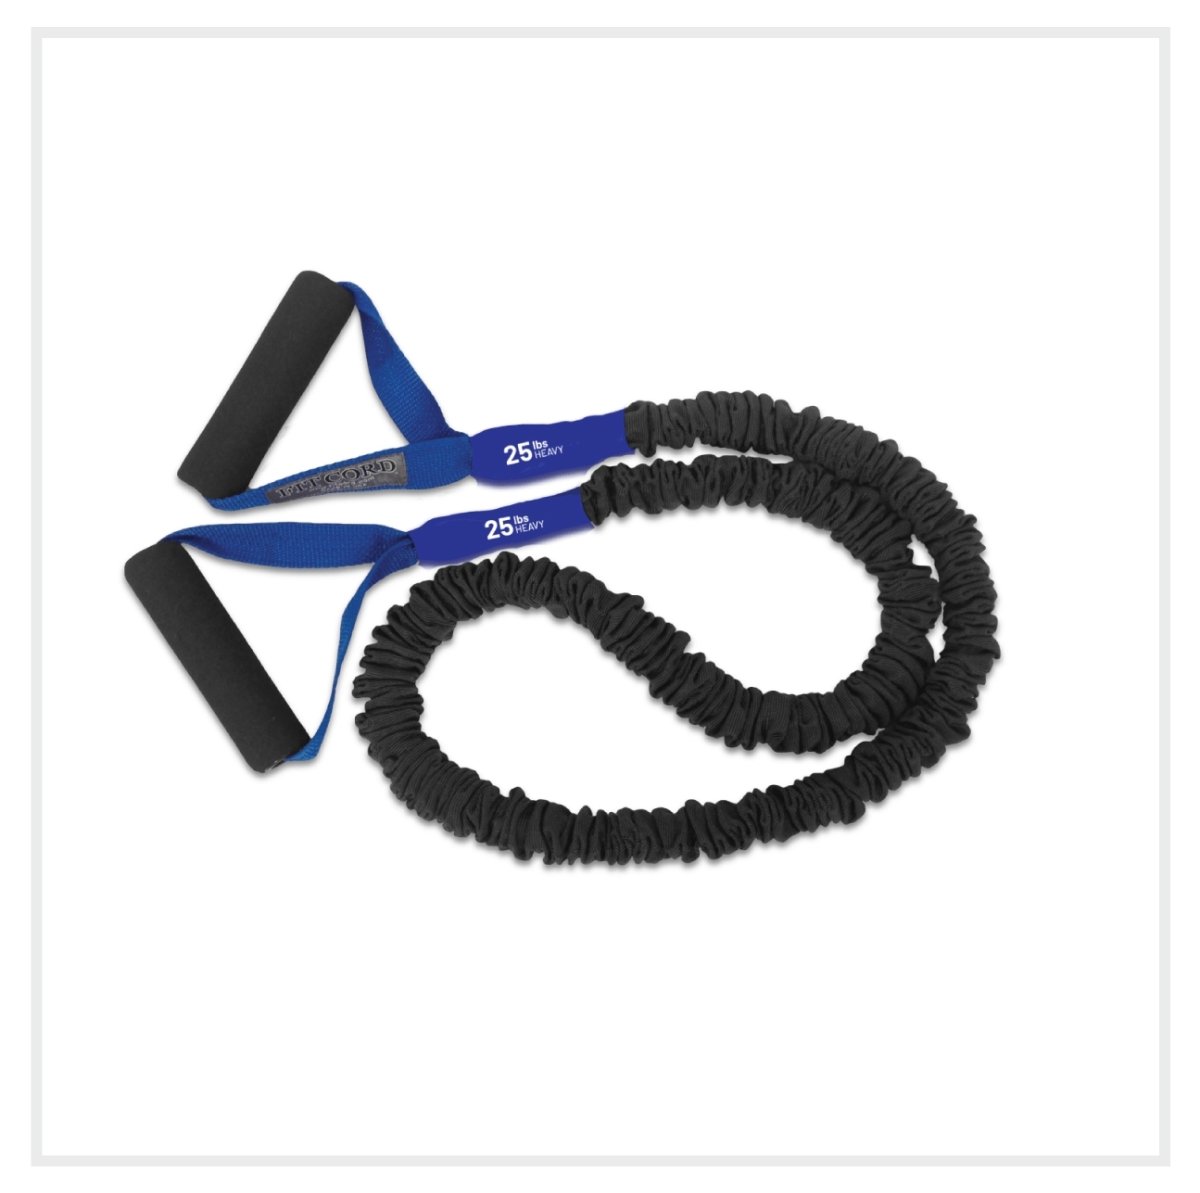 LONG FitCord Resistance Band- 6ft  Heavy (25lb)